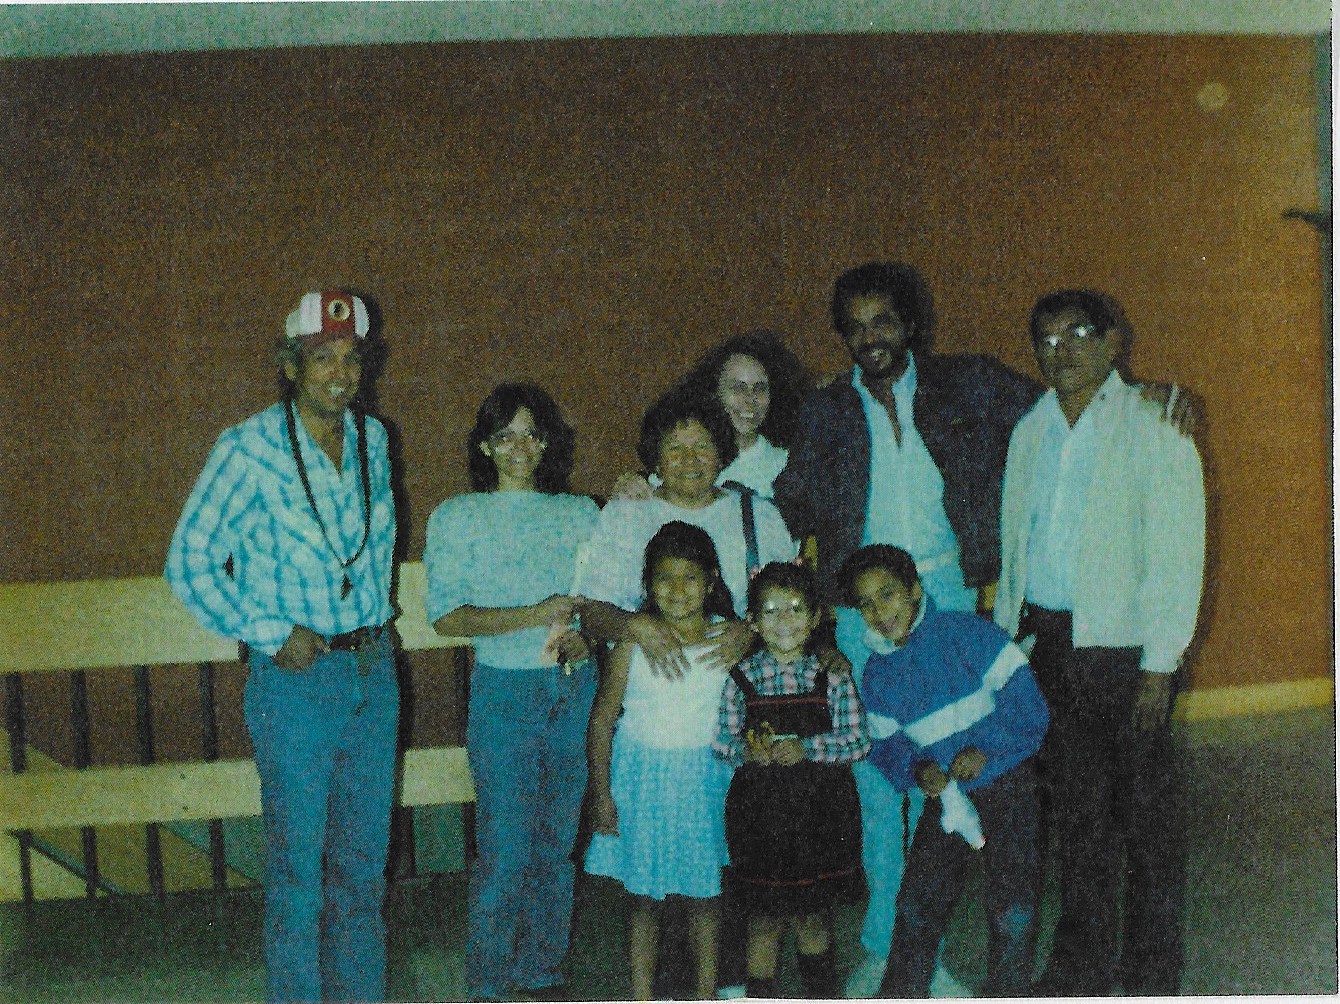 Ali Zaid and Robert Gopher families gathered in MT, 1986